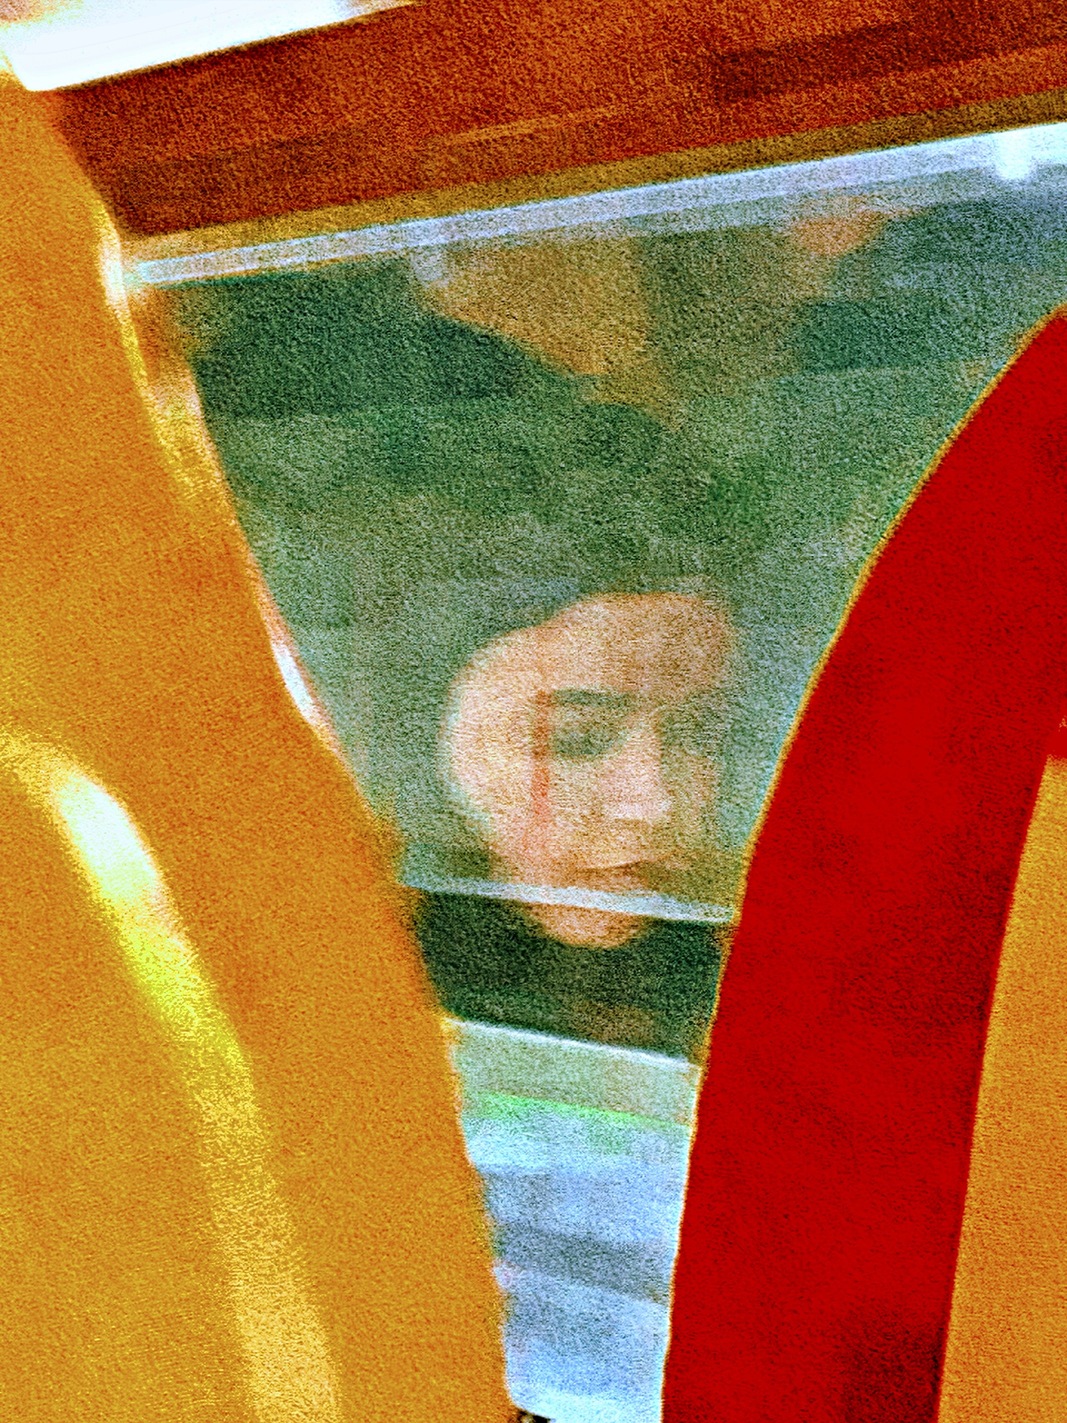 A woman reflected in a train window